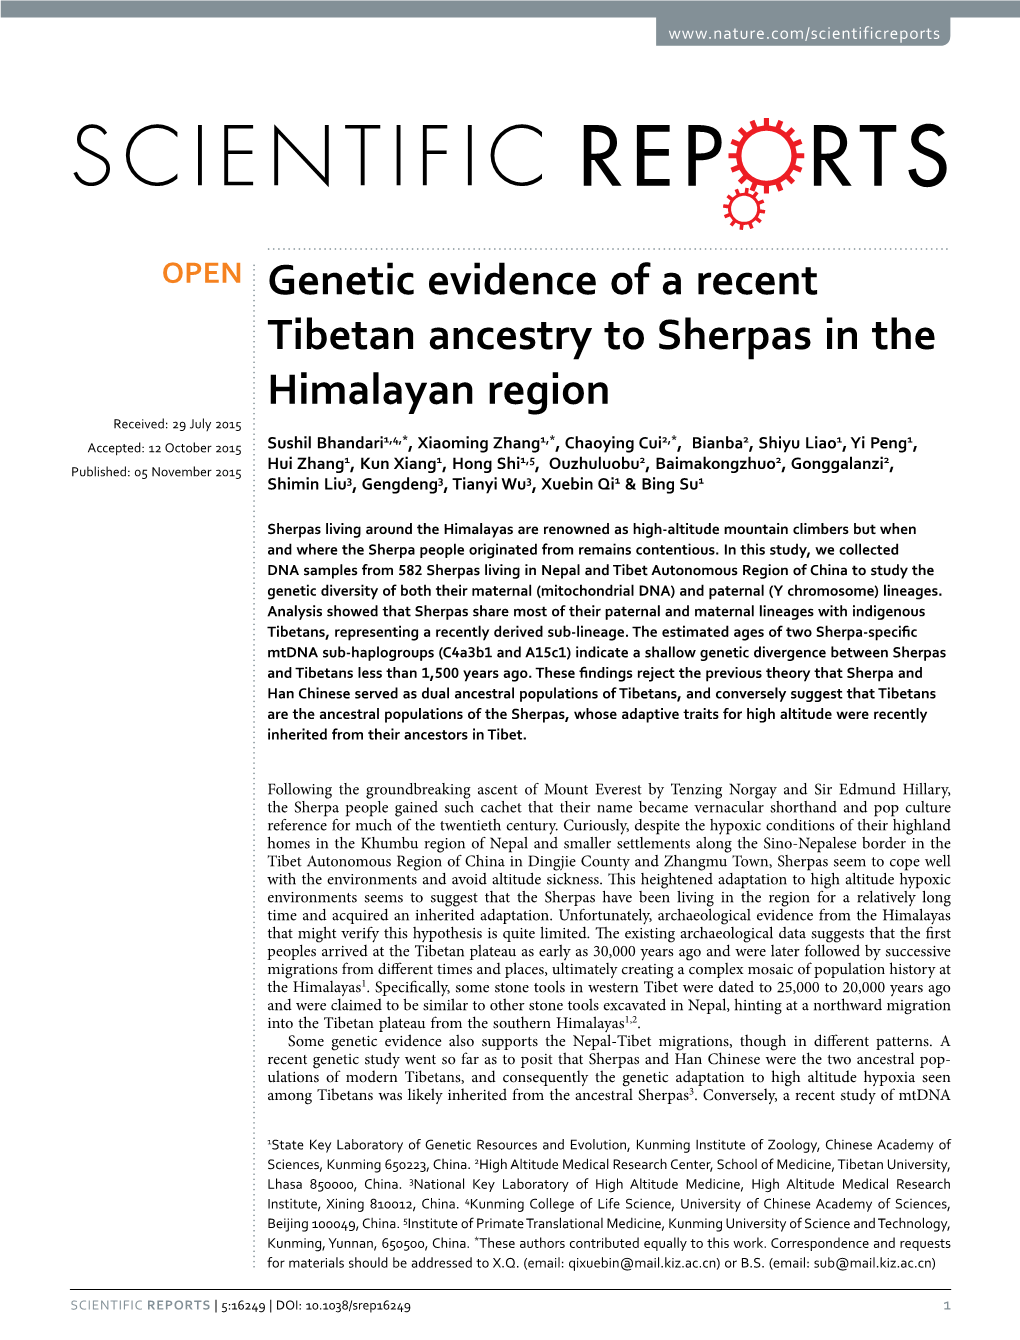 Genetic Evidence of a Recent Tibetan Ancestry to Sherpas in The